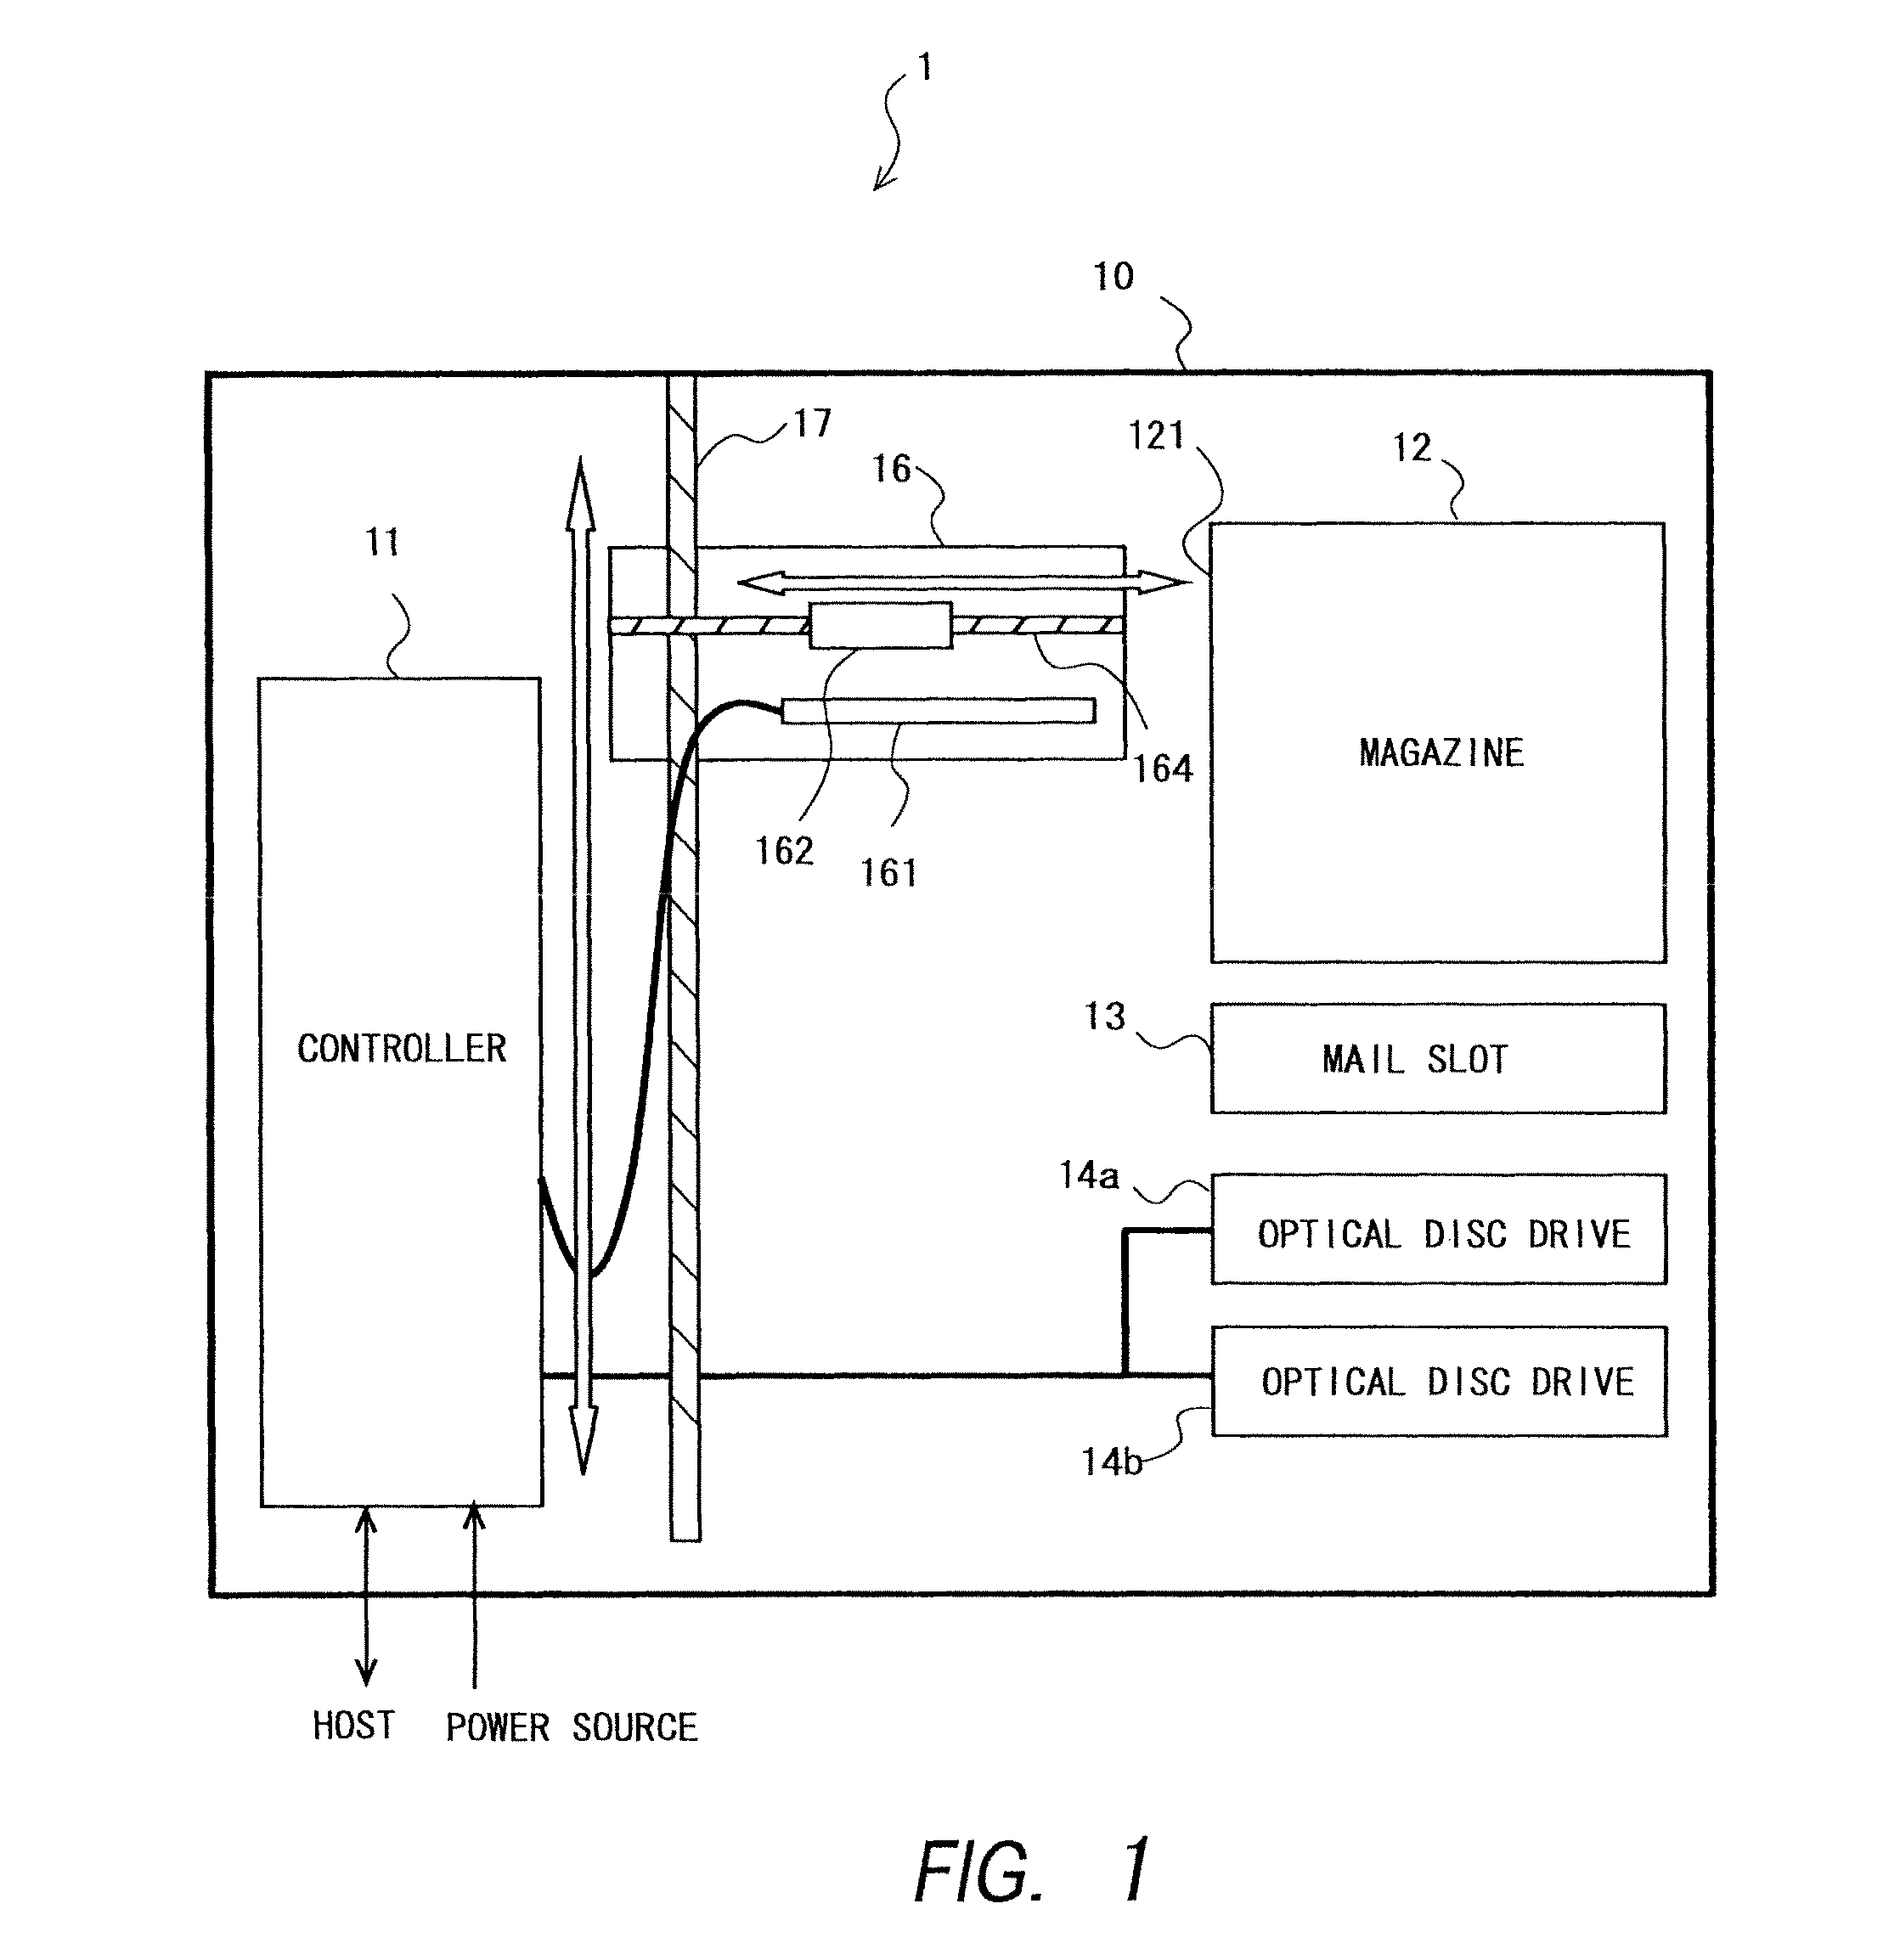 Disk library apparatus